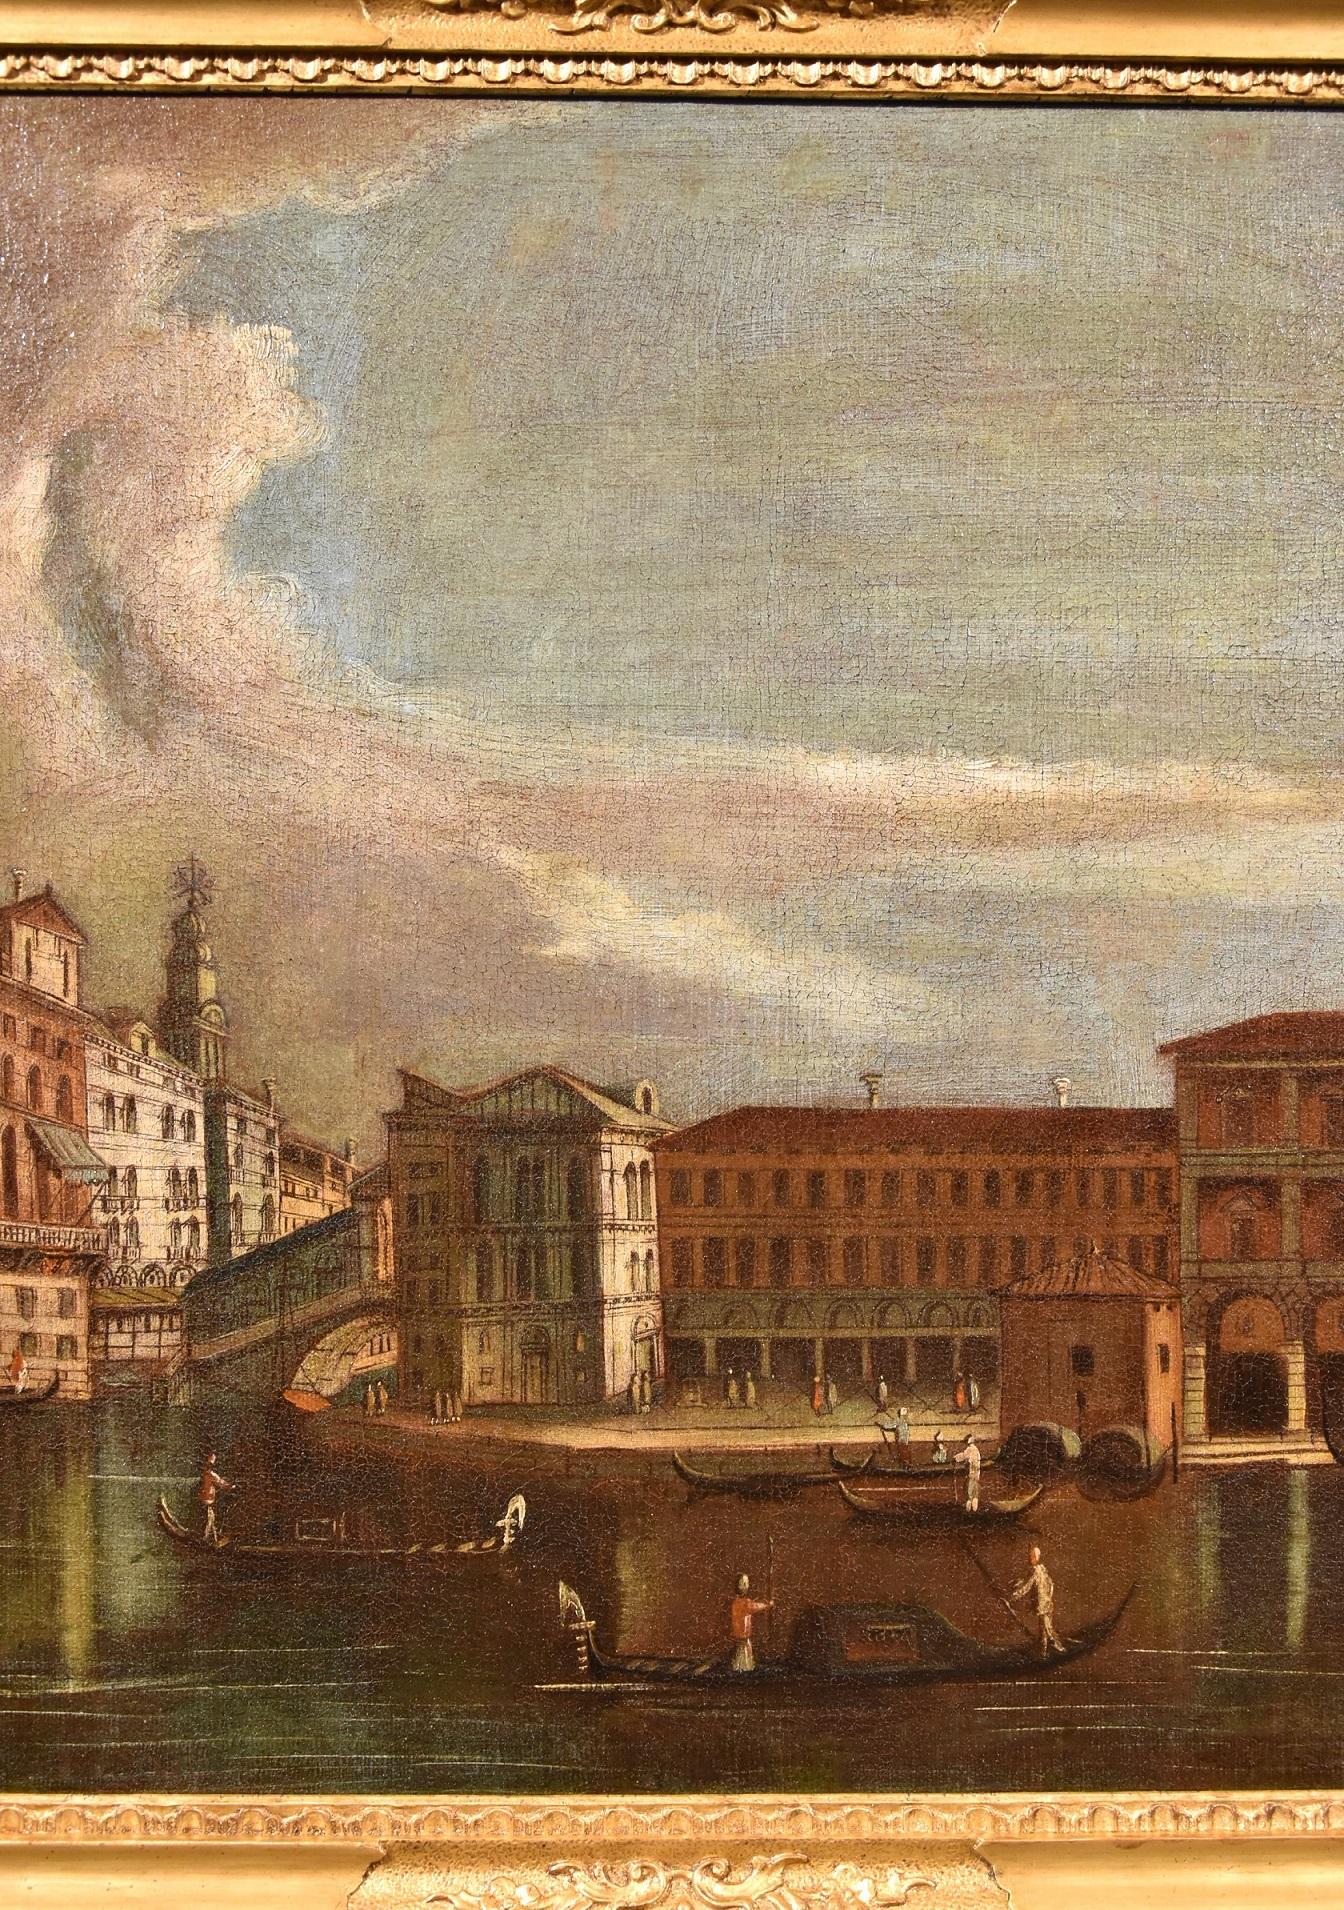 Tironi Venice Grand Canal Landscape Paint Oil on canvas Old master 18th Century - Brown Landscape Painting by Francesco Tironi (Venice, about 1745 - 1797)